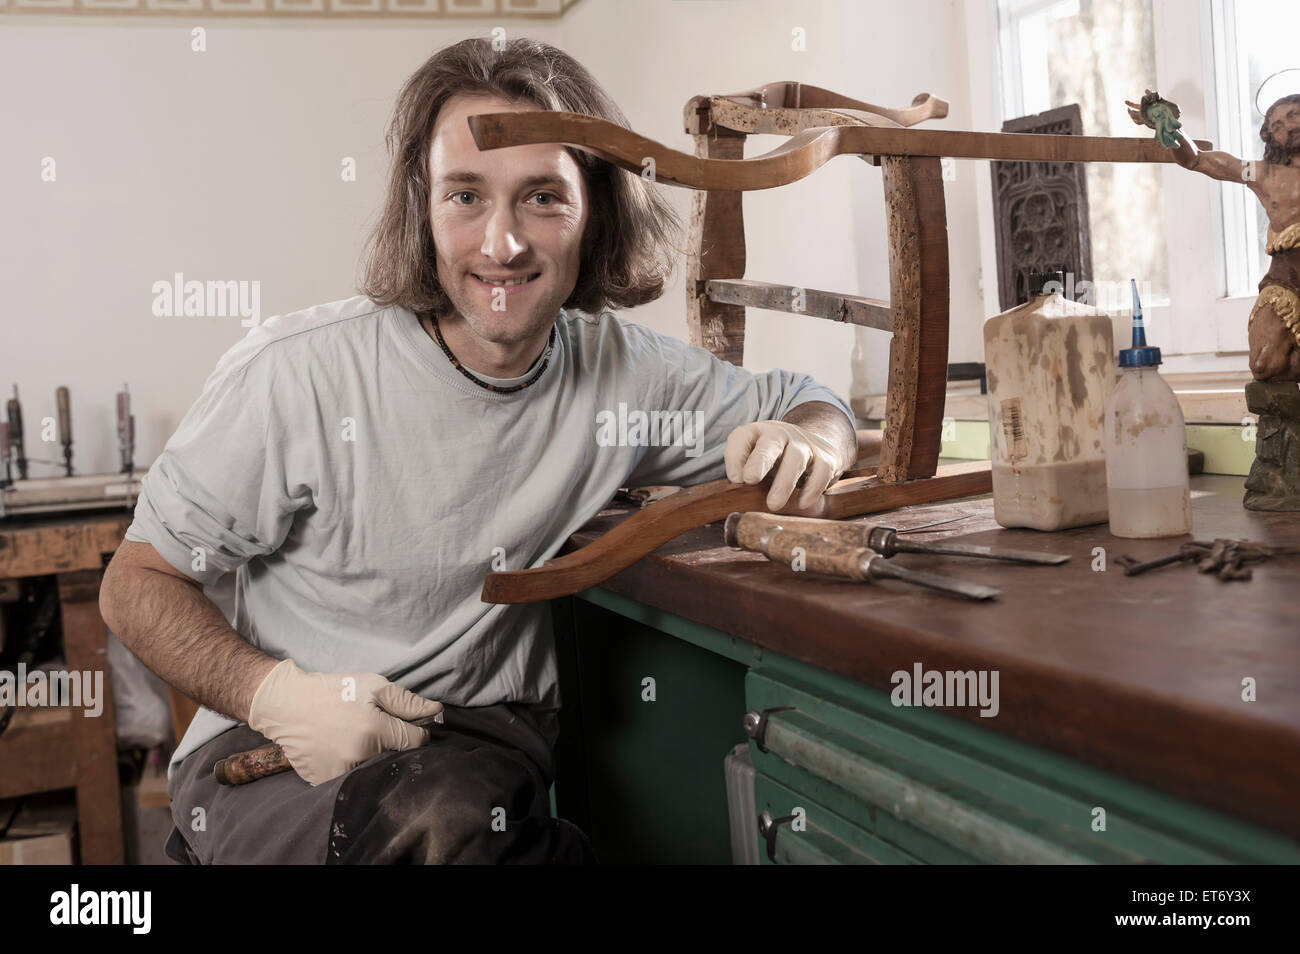 Carpenter repairing an antique wooden chair at workshop, Bavaria, Germany Stock Photo